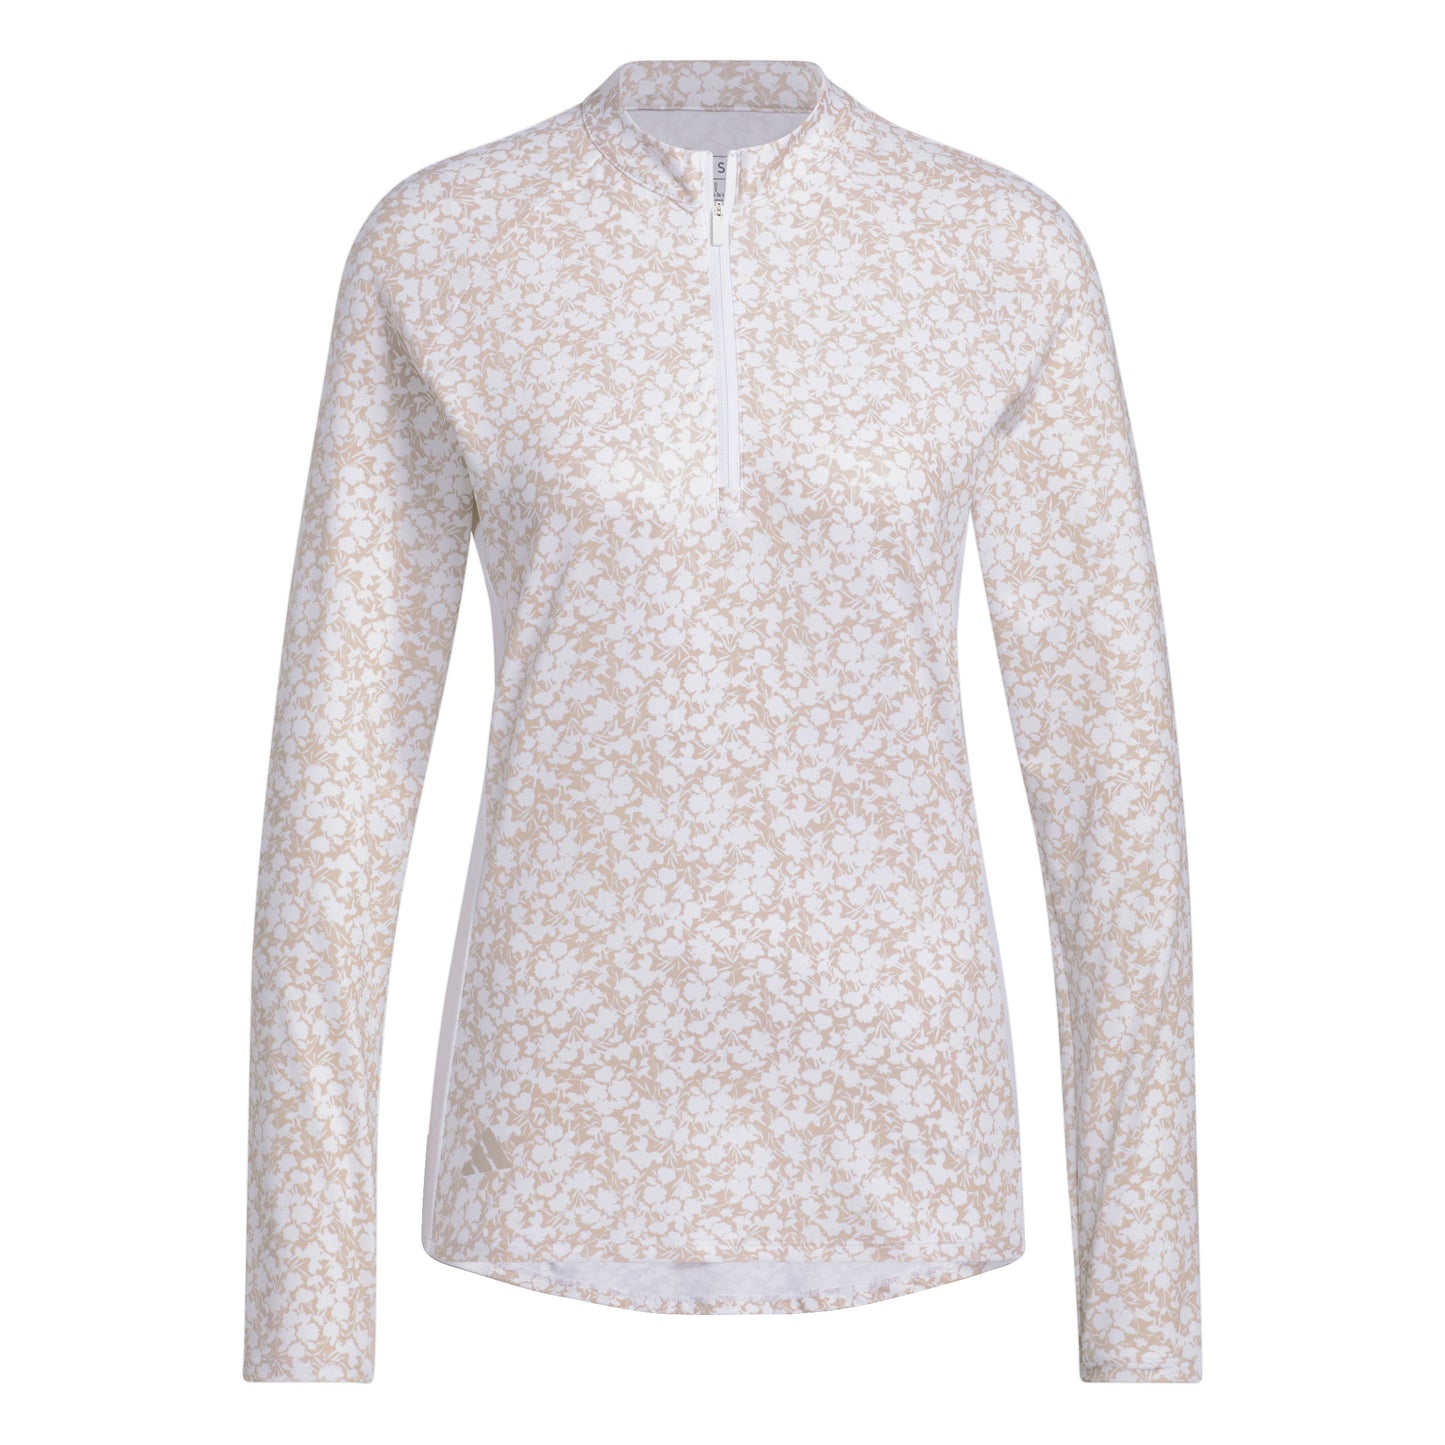 adidas Ladies Long Sleeve Golf Polo with Soft Floral Print